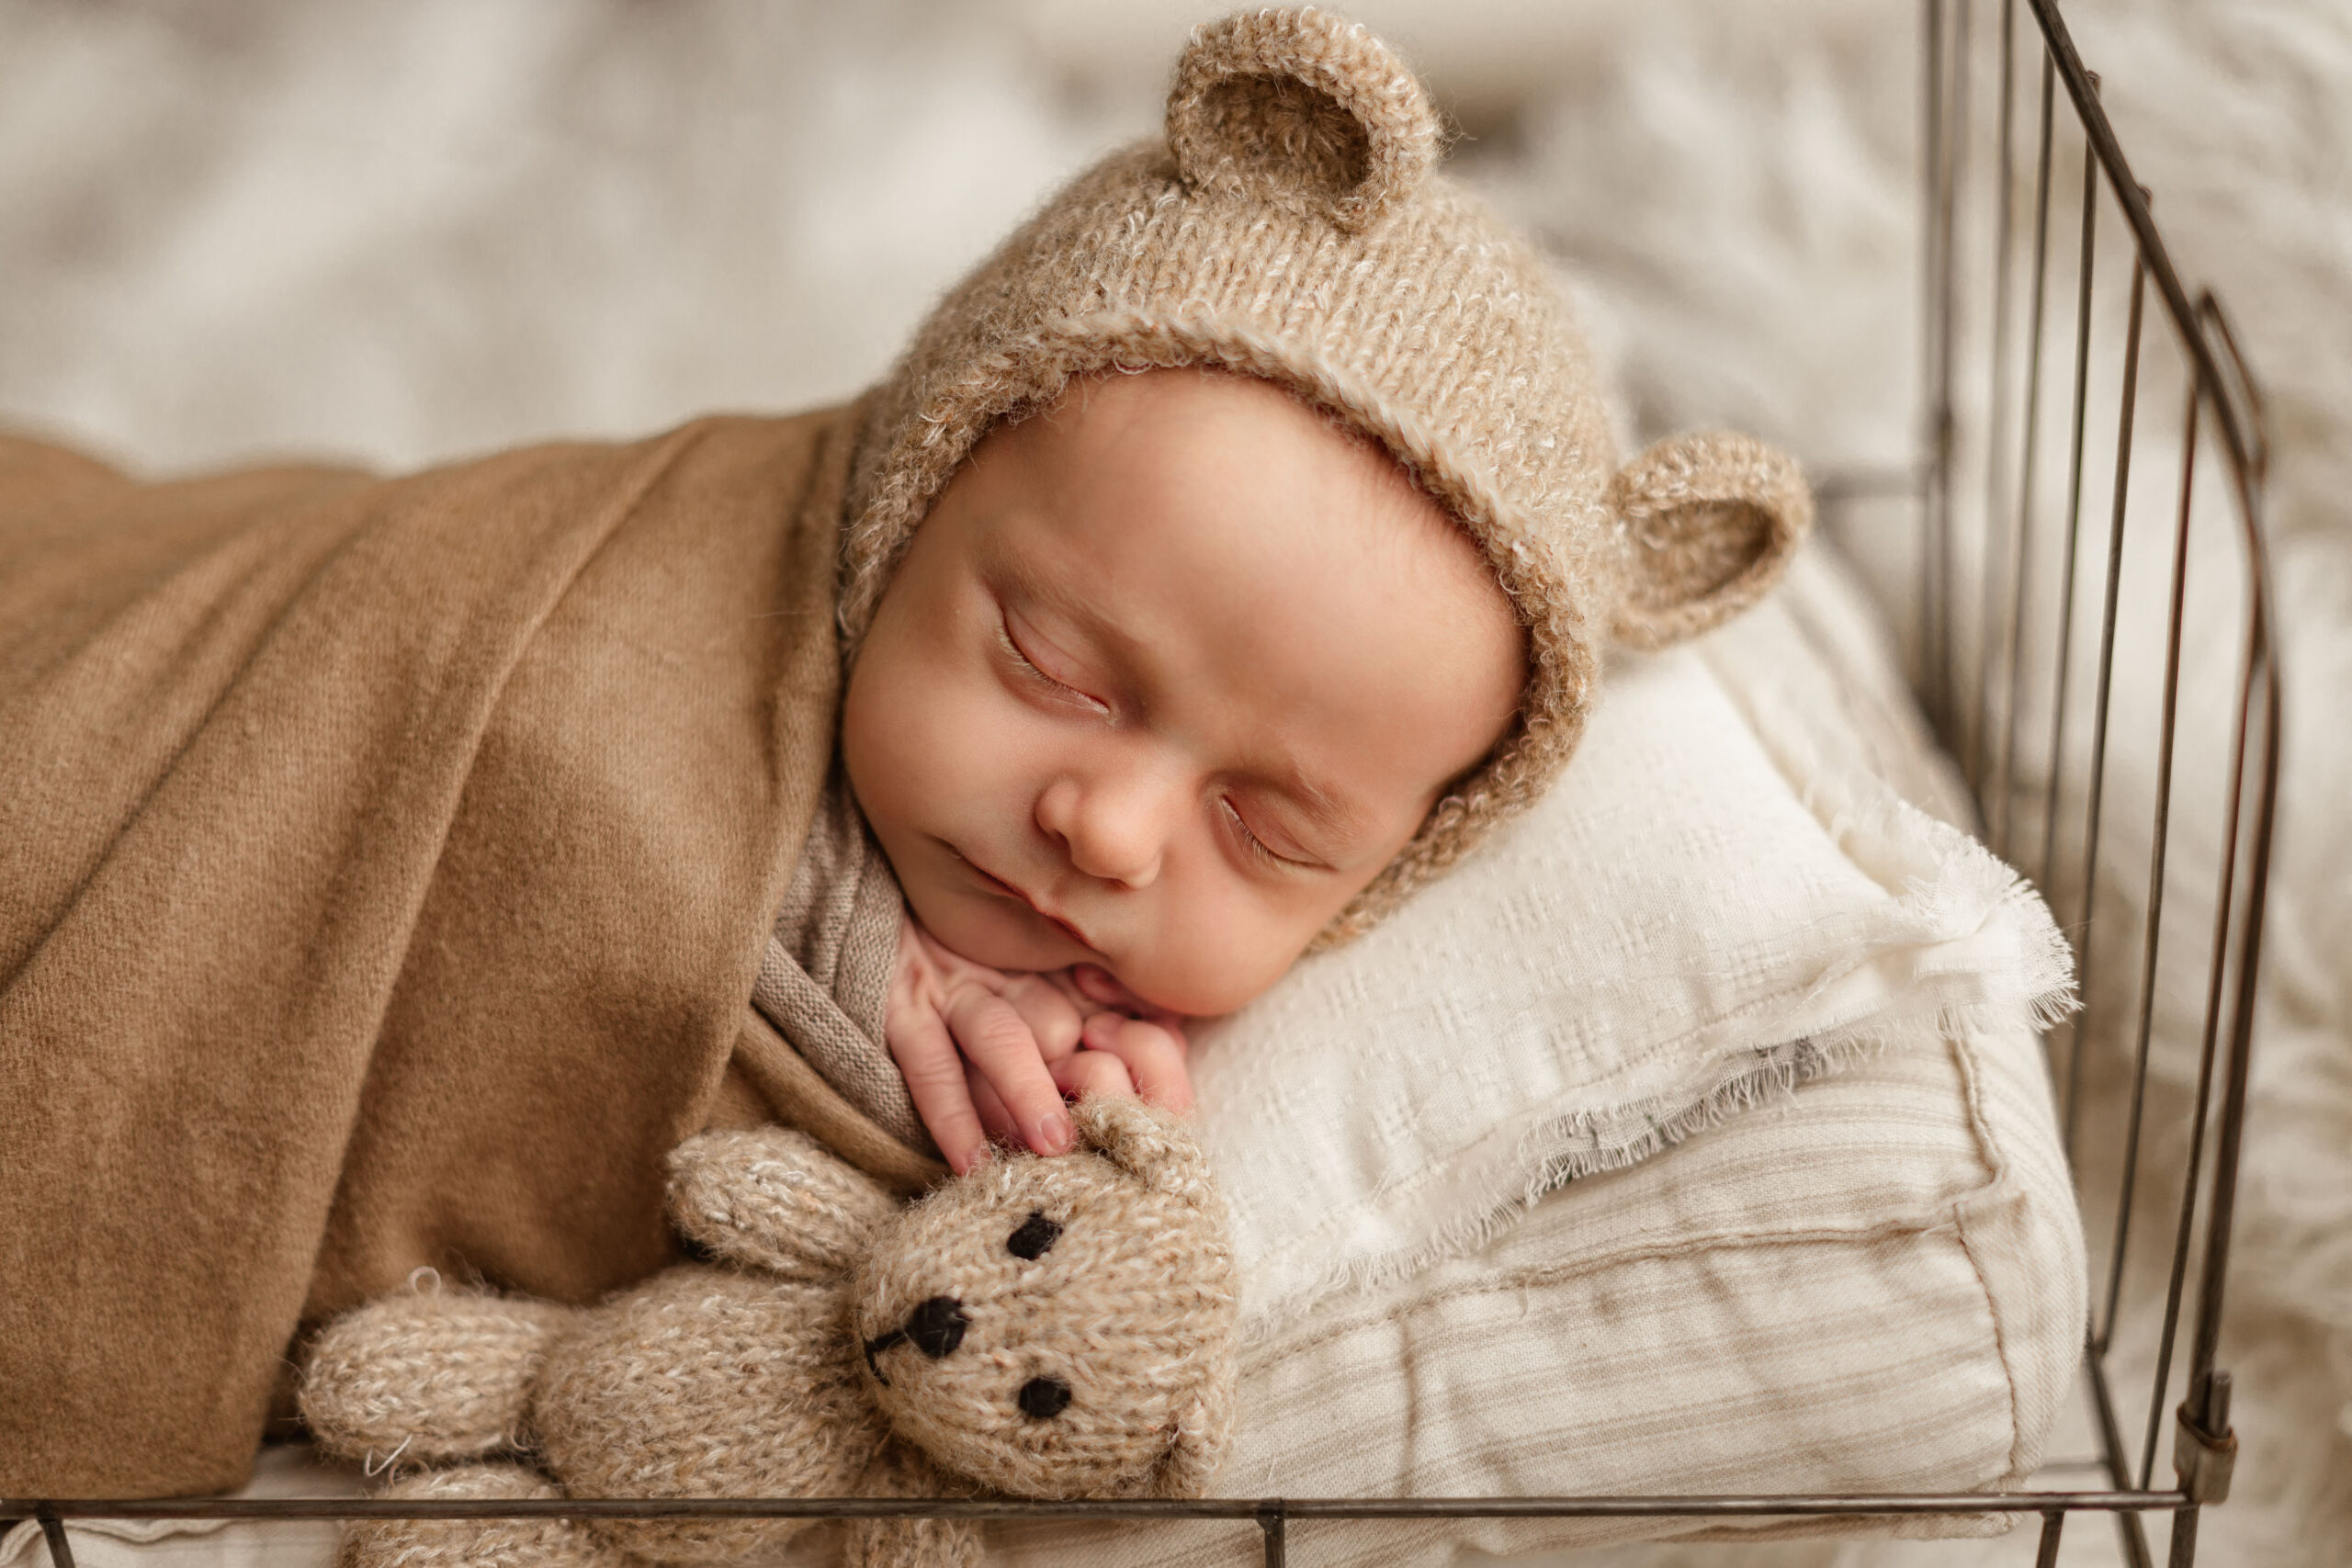 newborn baby wrapped in brown wearing a bear hat sleeping on a bed Nashville baby boutiques